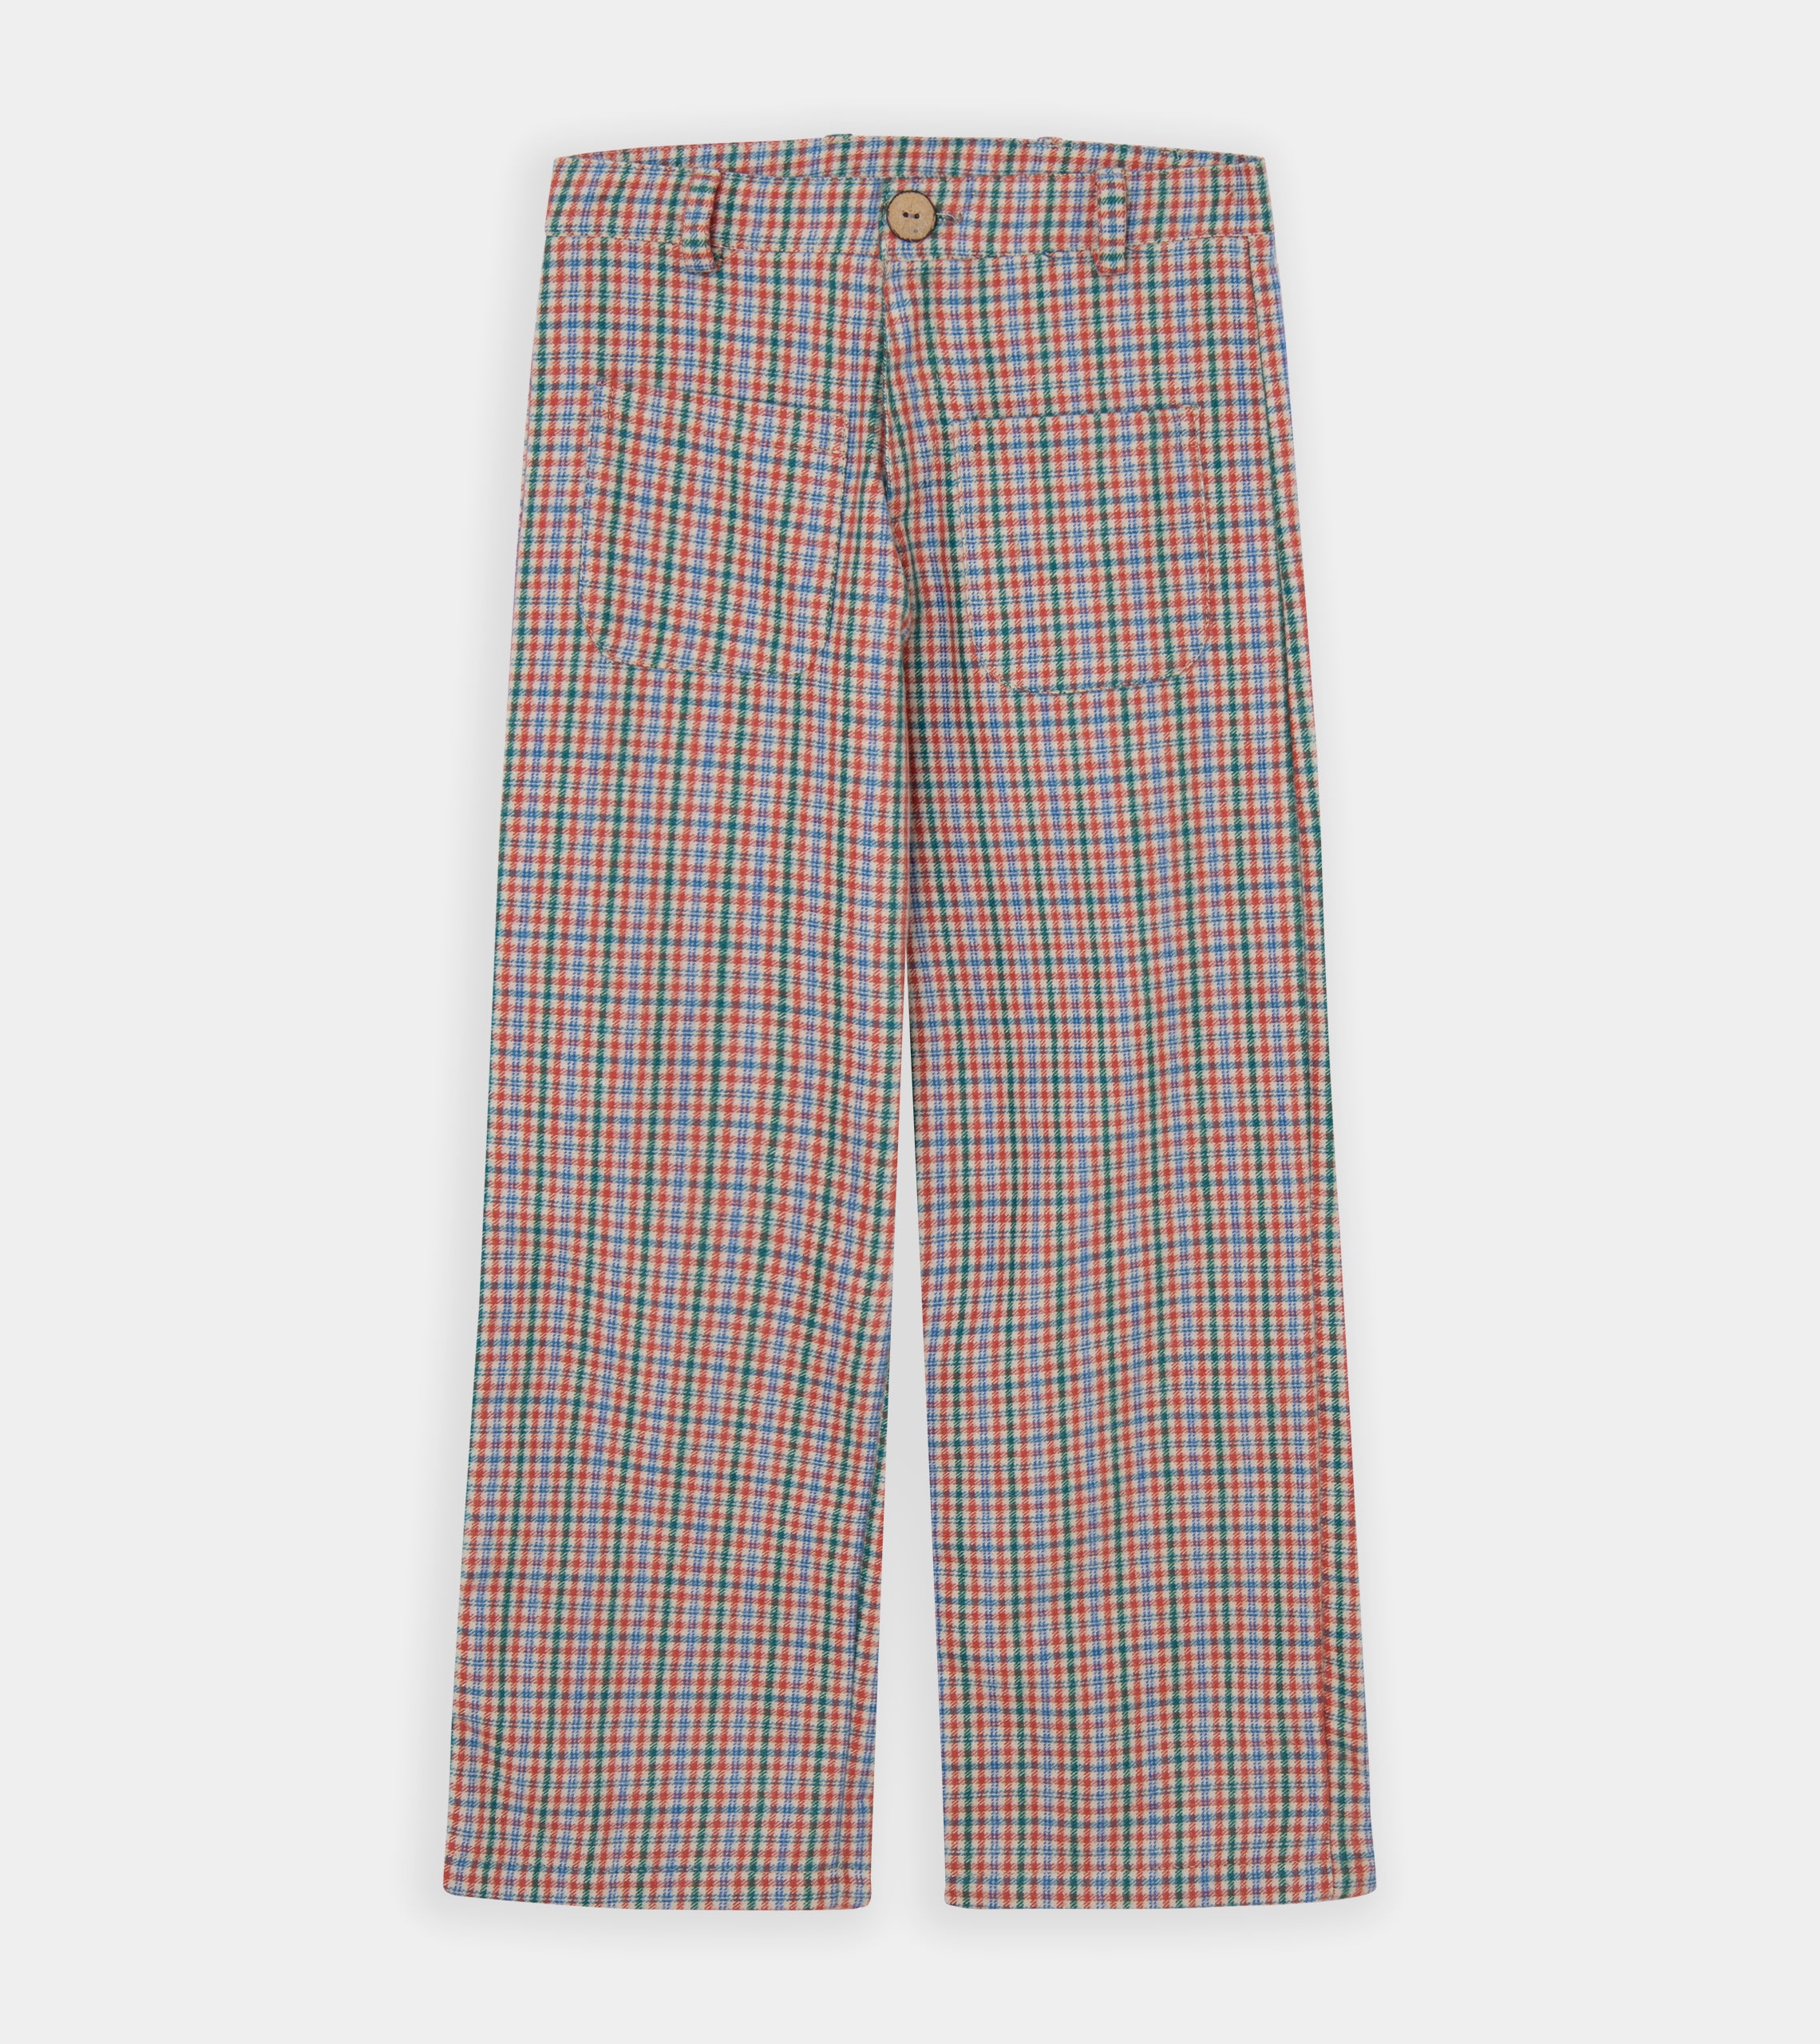 Checked Multicolor Pants